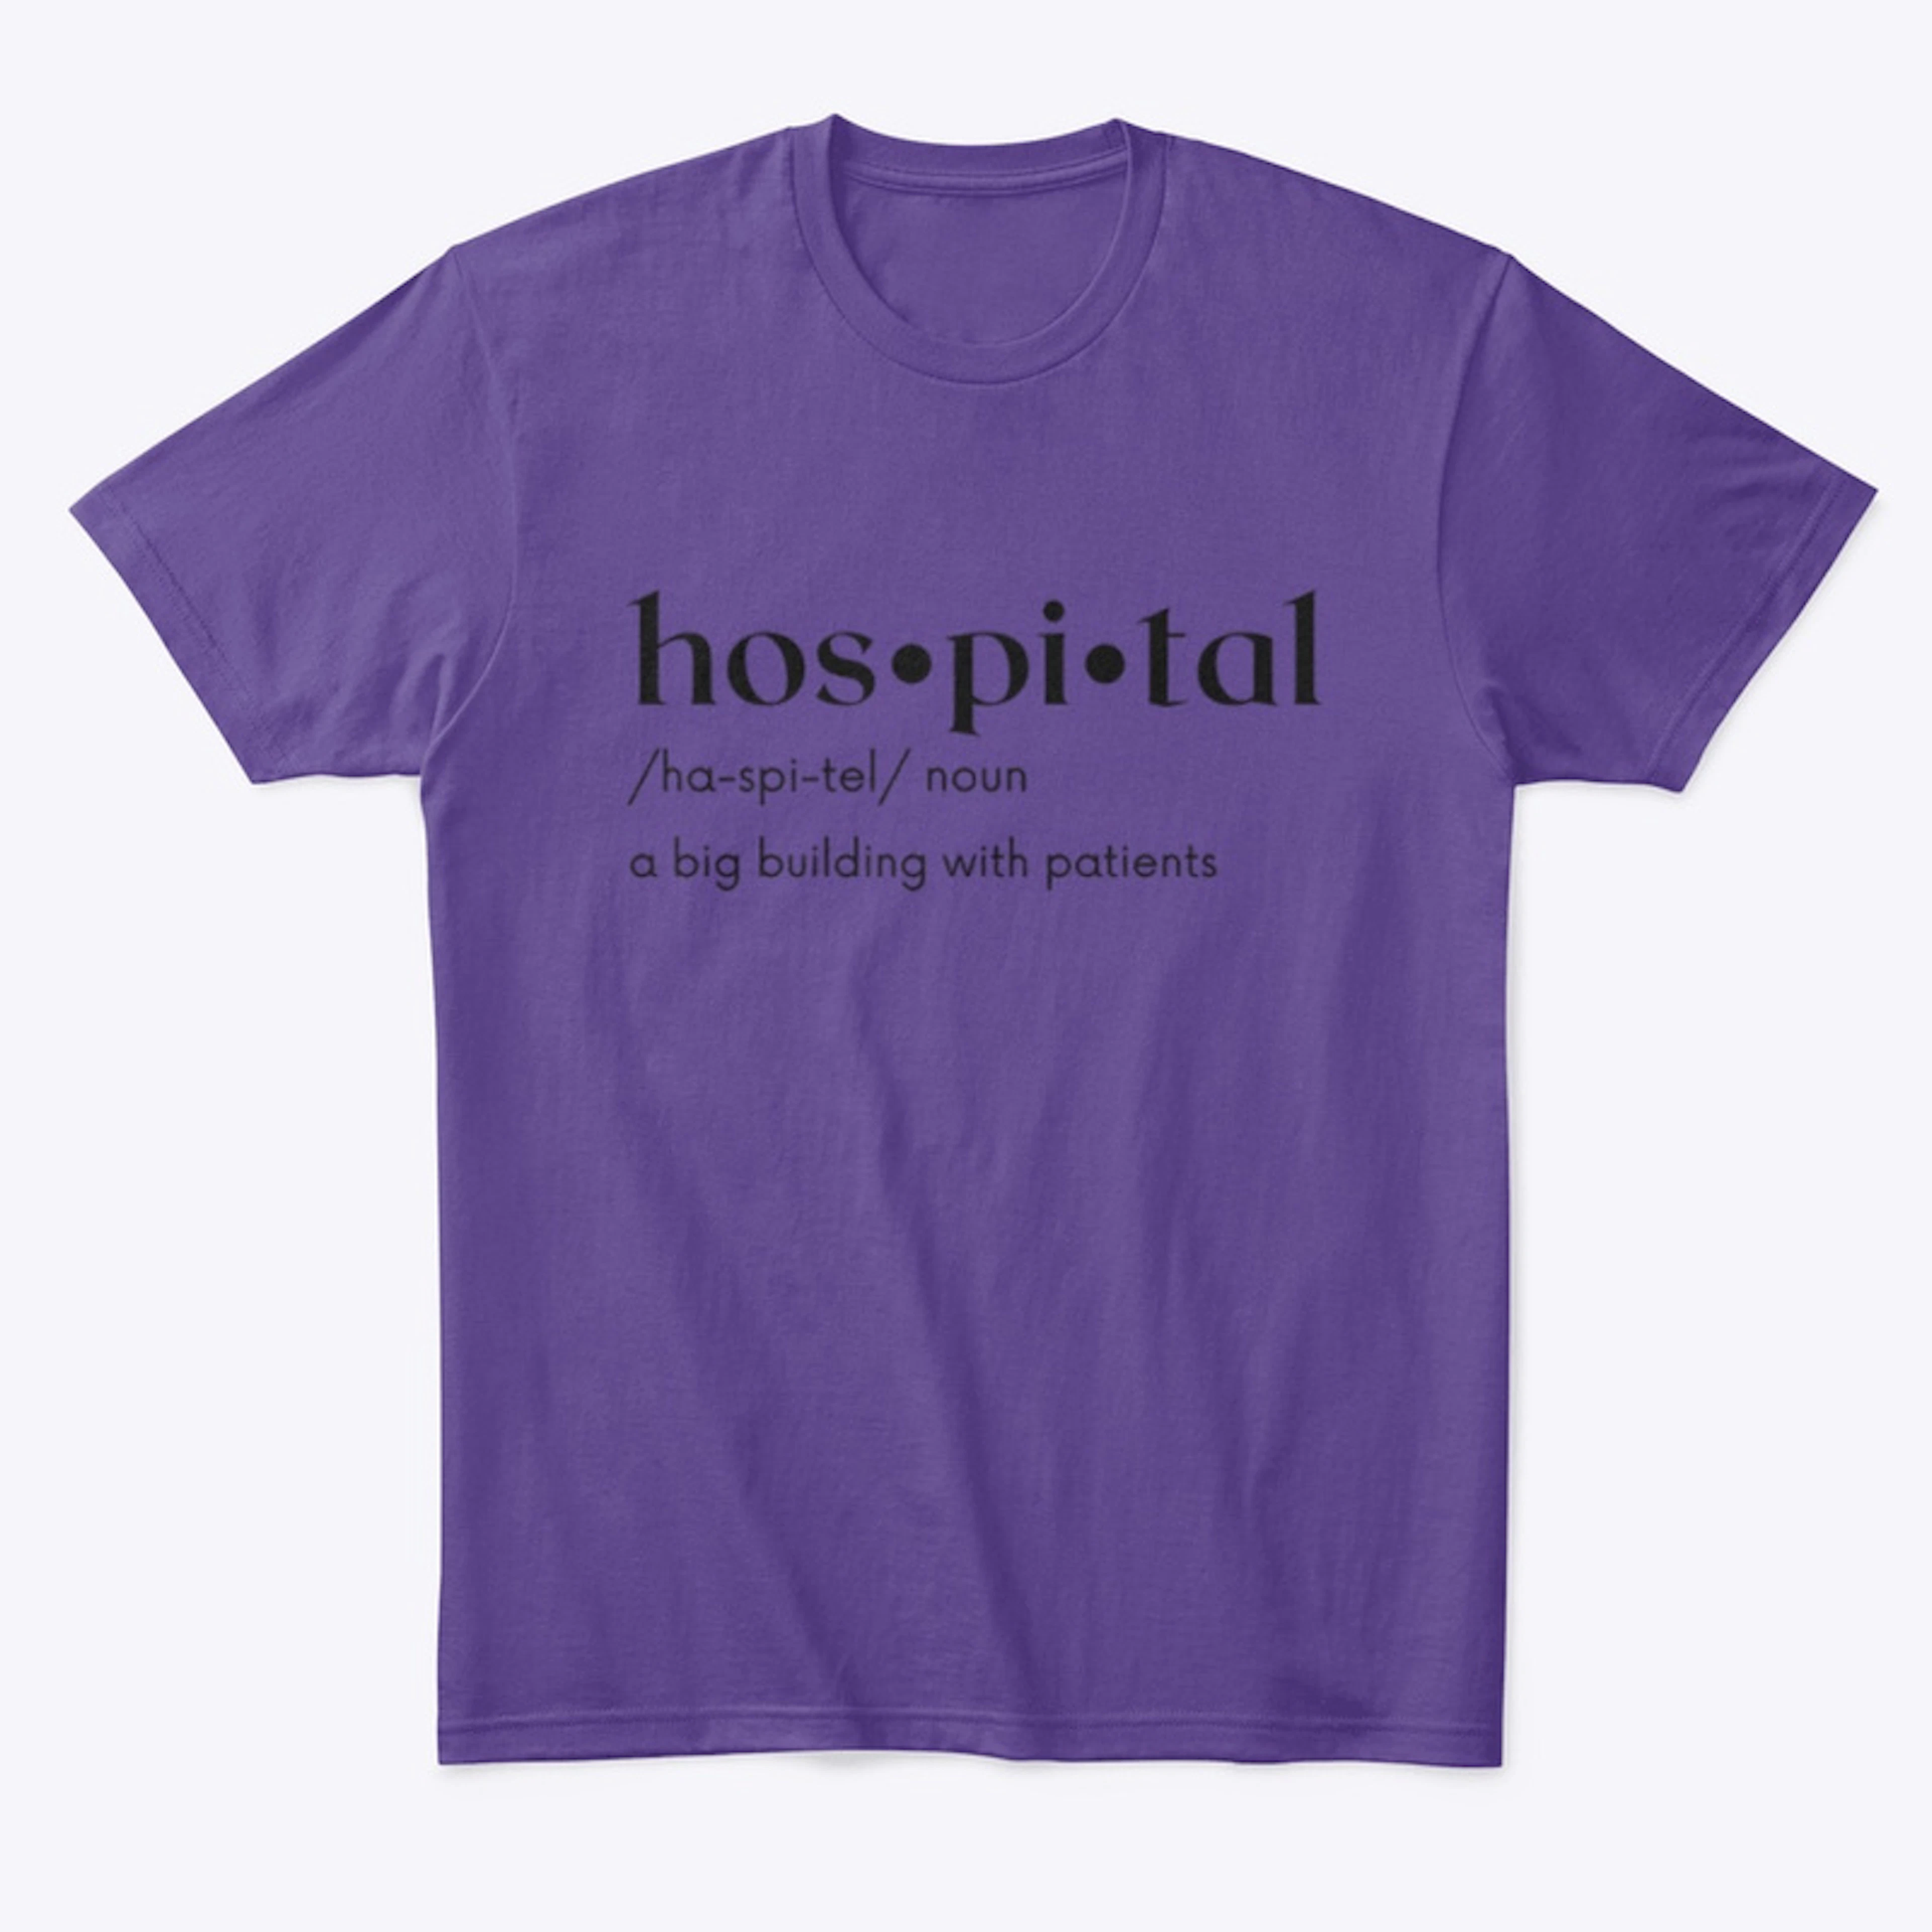 A hospital, what is it?